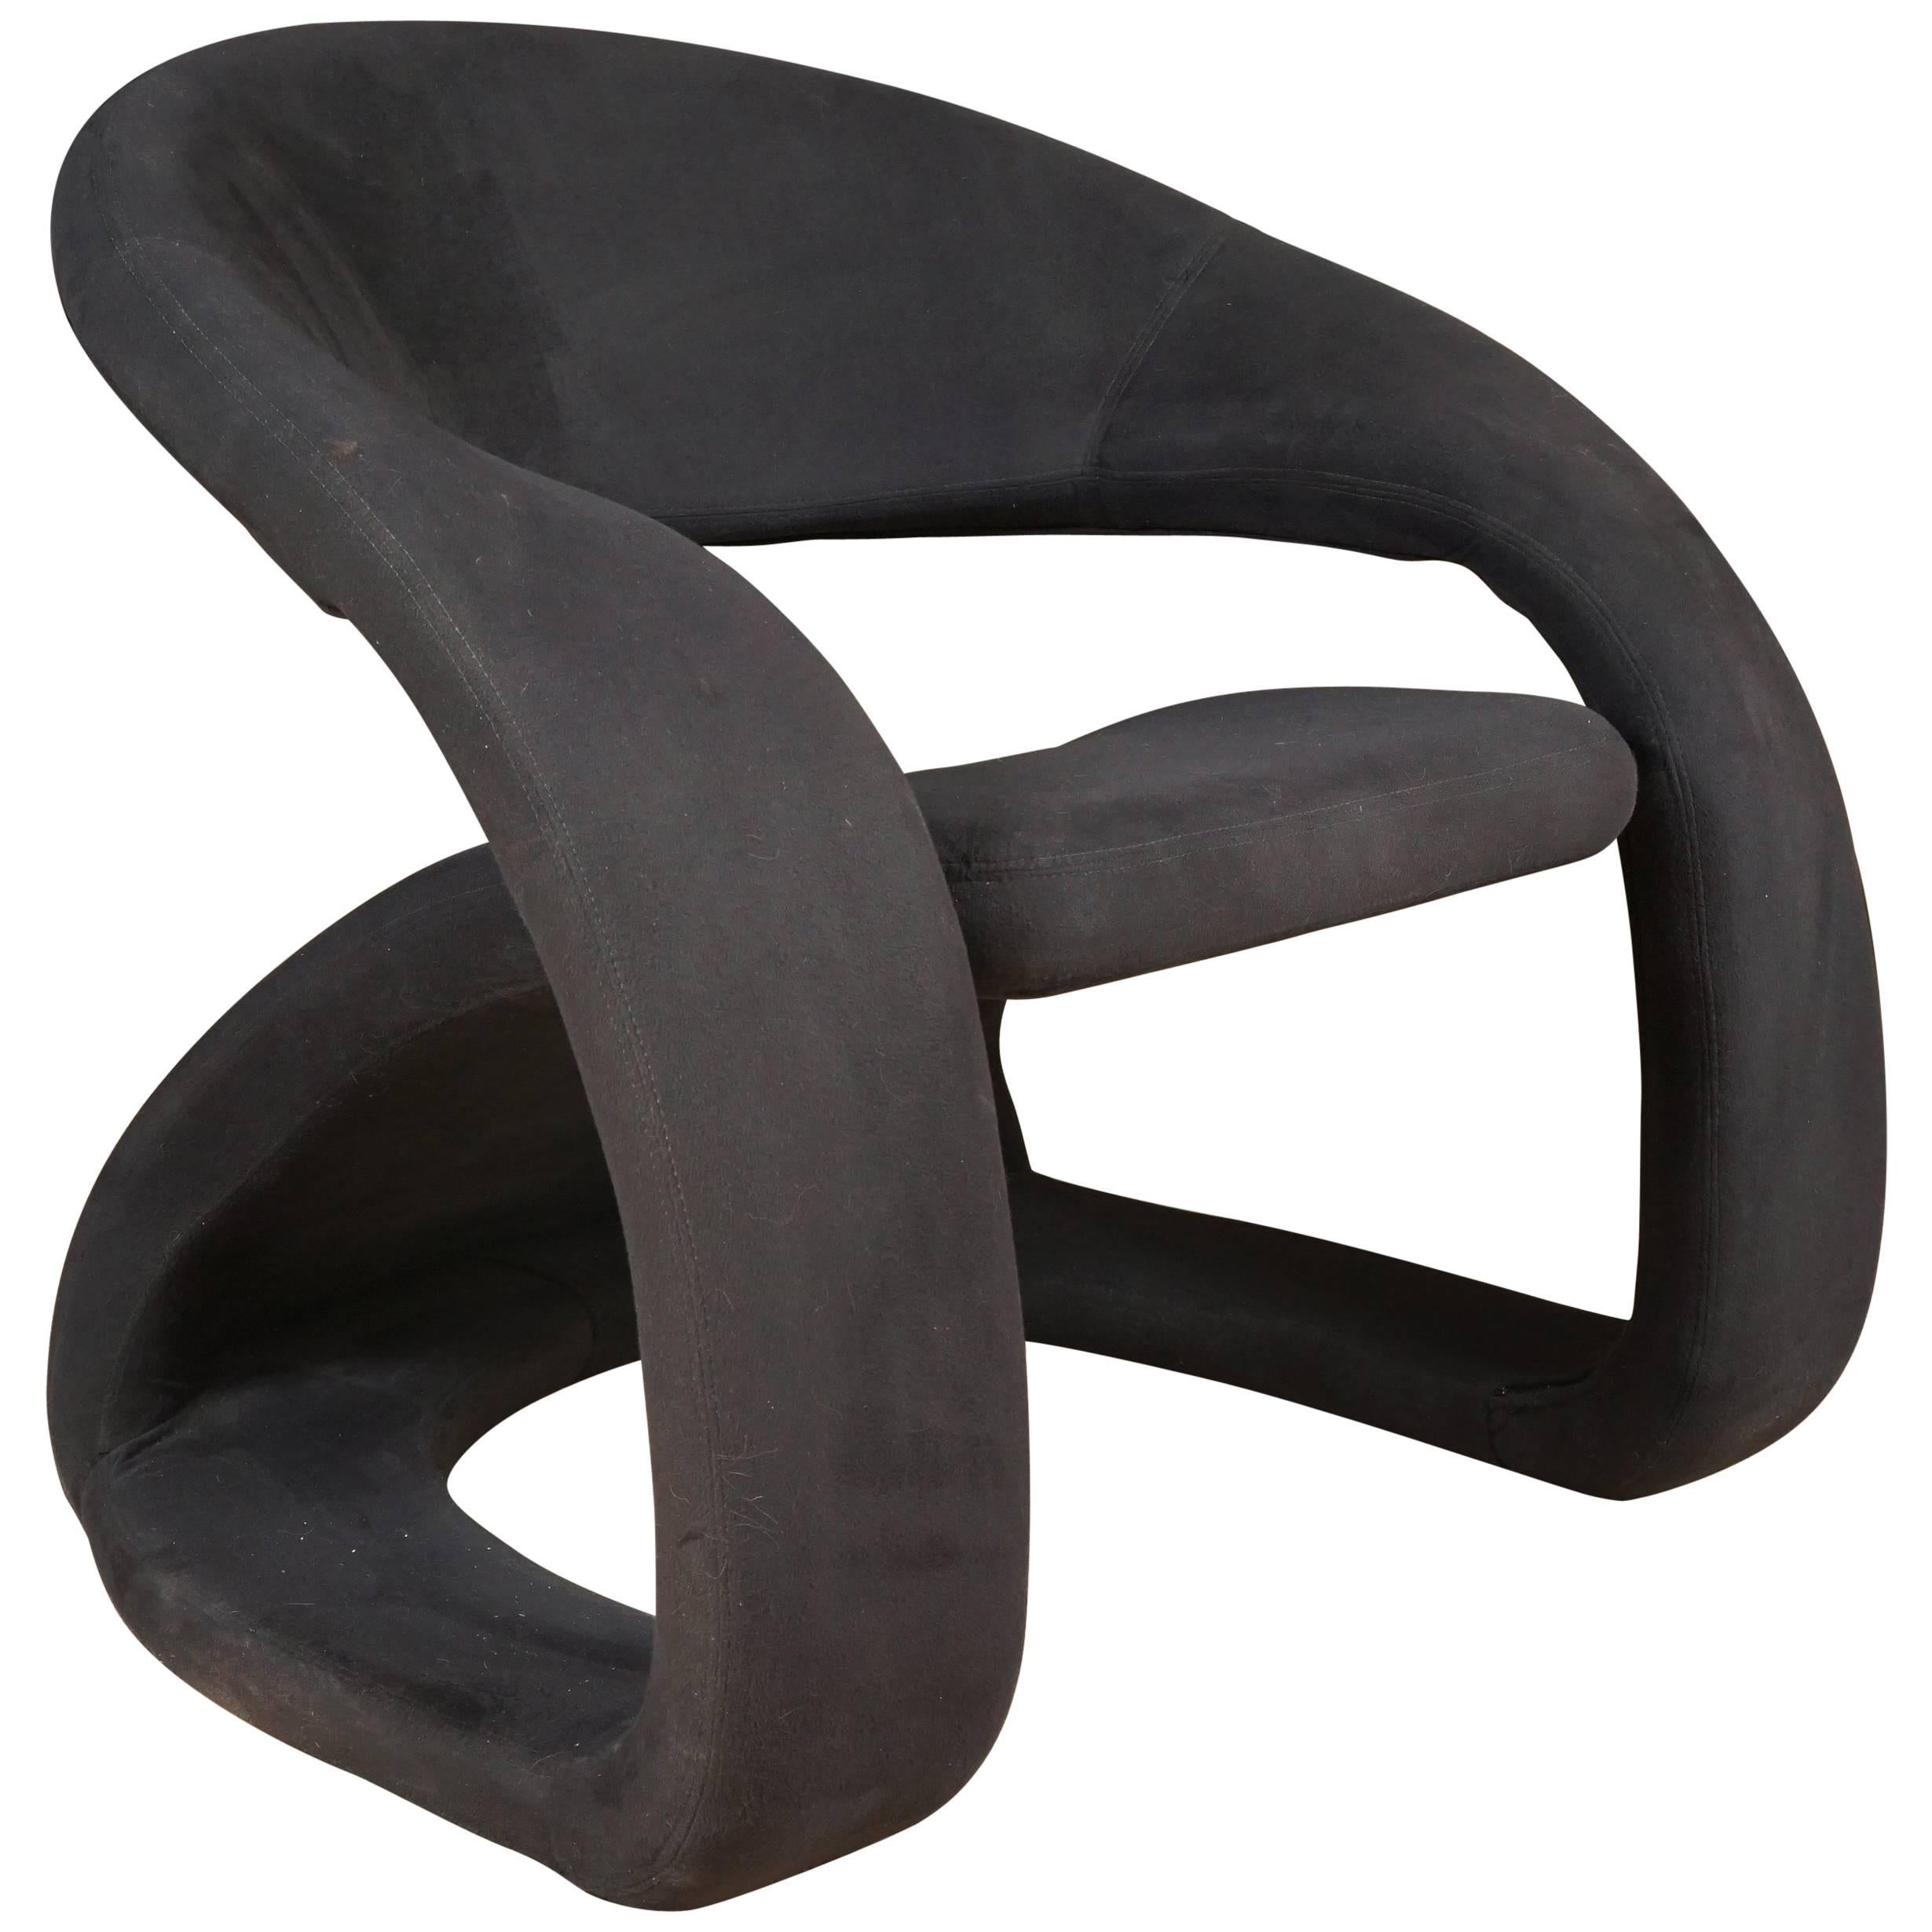 Curved Chair in Black For Sale